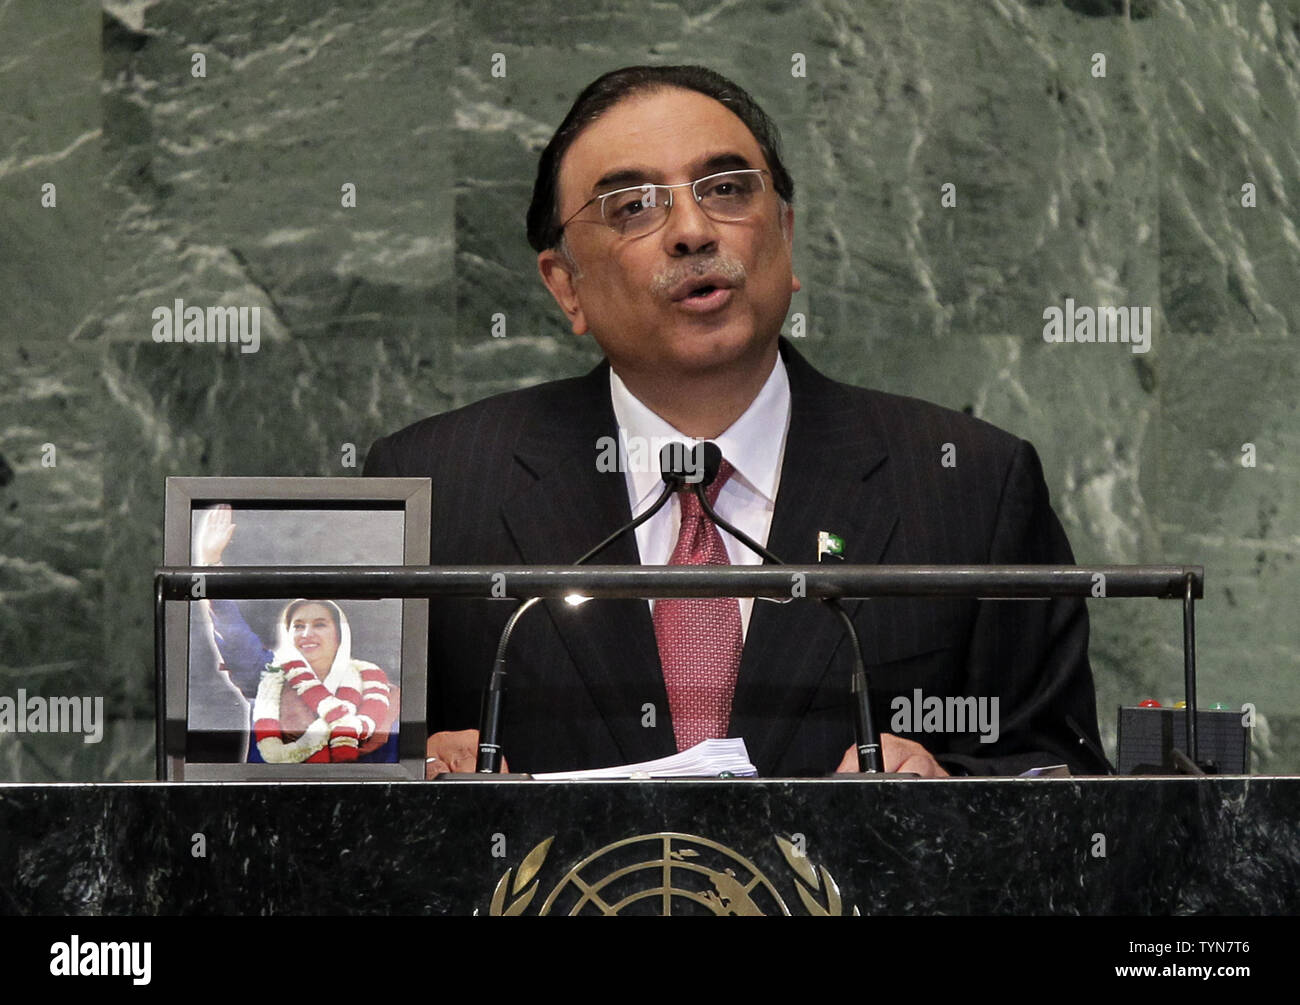 His Excellency Asif Ali Zardari, President of the Islamic Republic of Pakistan addresses the United Nations with a photo of the late Prime Minister Benazir Bhutto to his right at the 67th United Nations General Assembly in the UN building in New York City on September 25, 2012. Bhutto, who was assassinated in 2007.    UPI/John Angelillo Stock Photo